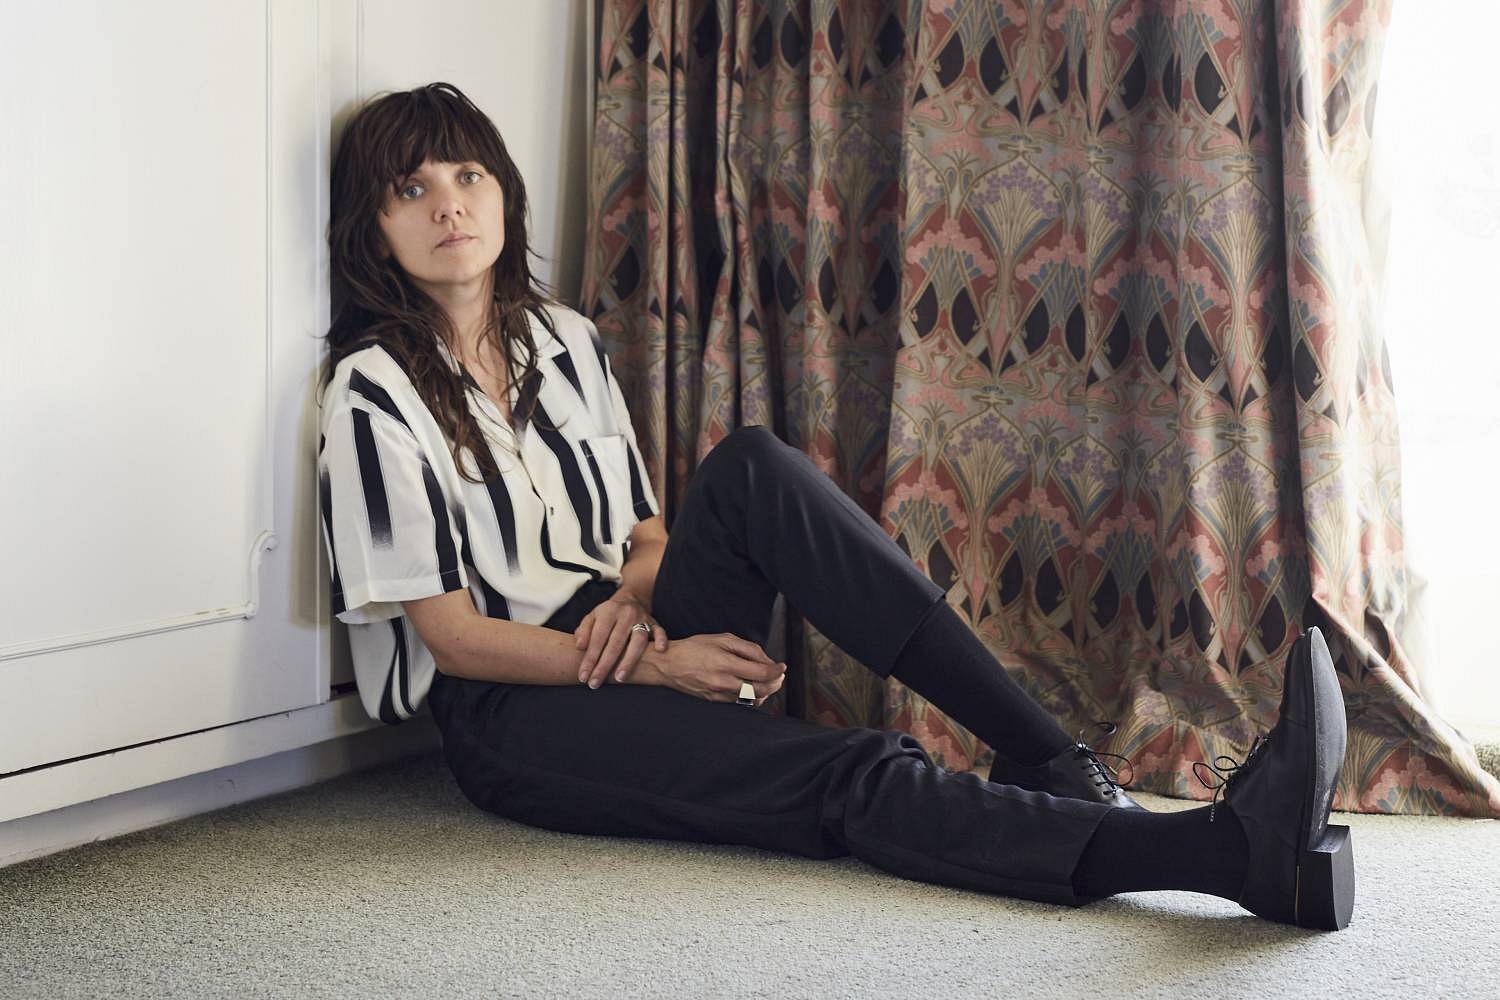 Courtney Barnett shares new song ‘Write A List of Things to Look Forward To’